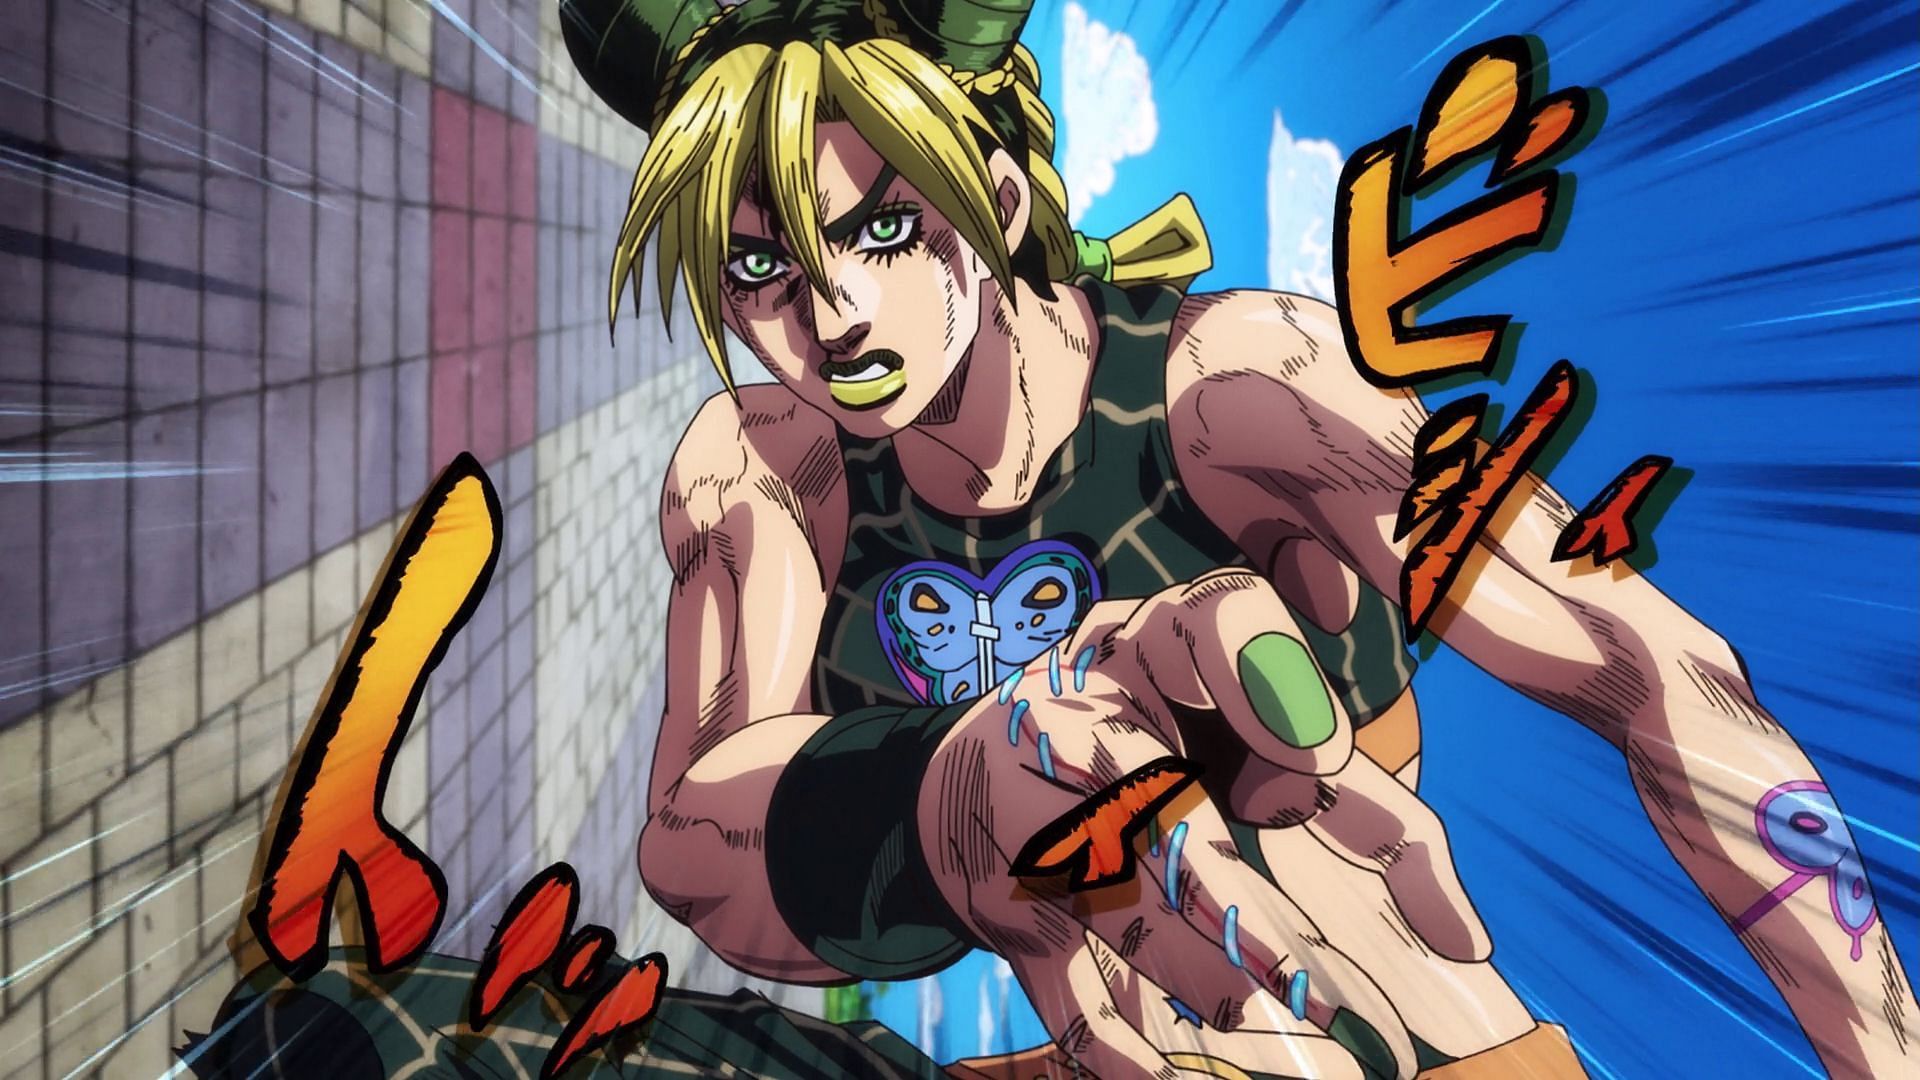 Jolyne as seen in the Stone Ocean anime series (Image via David Productions)